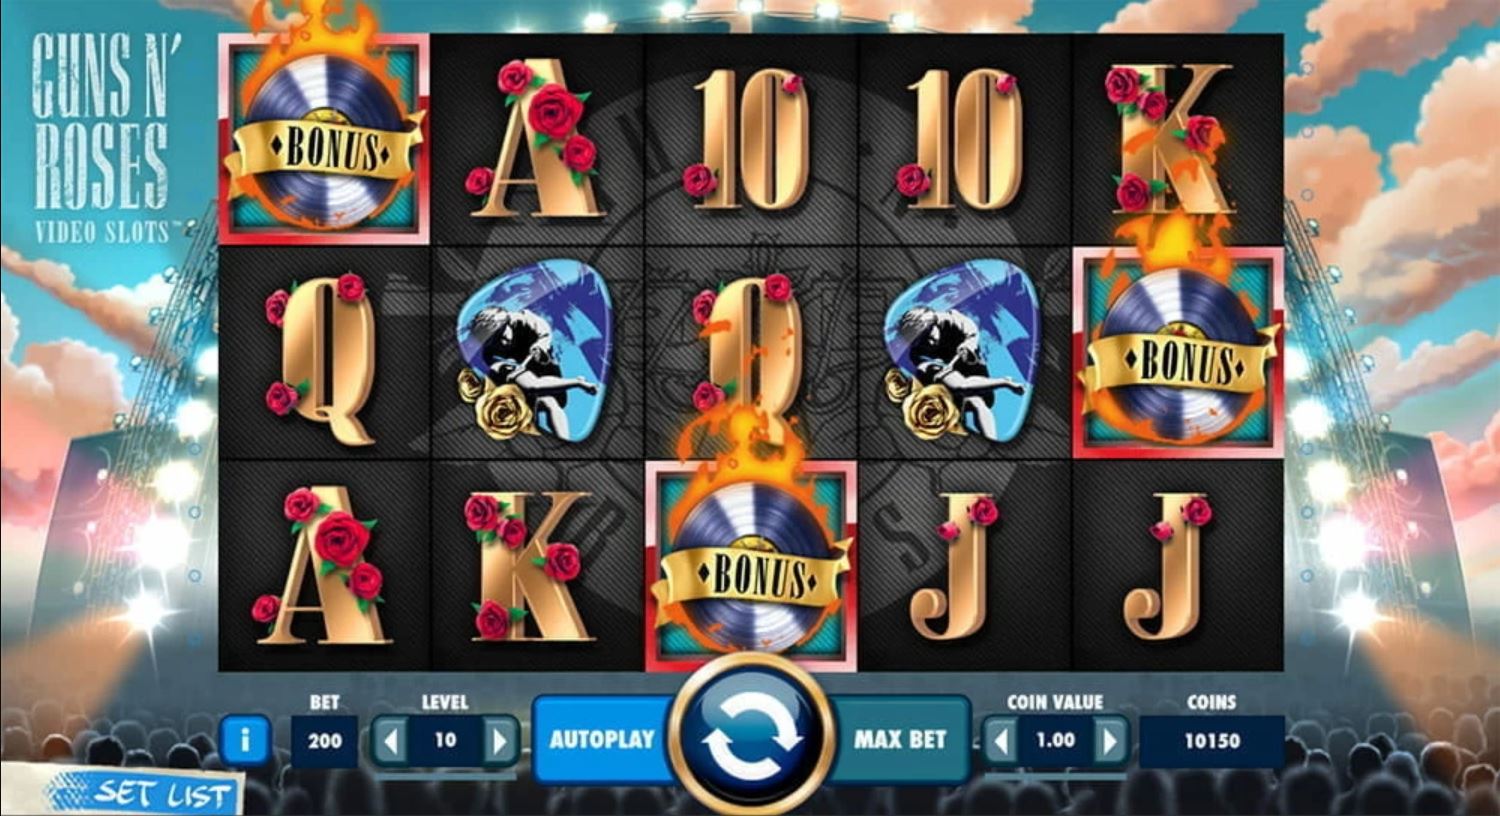 Simple Methods The Pros Use To Promote Casino